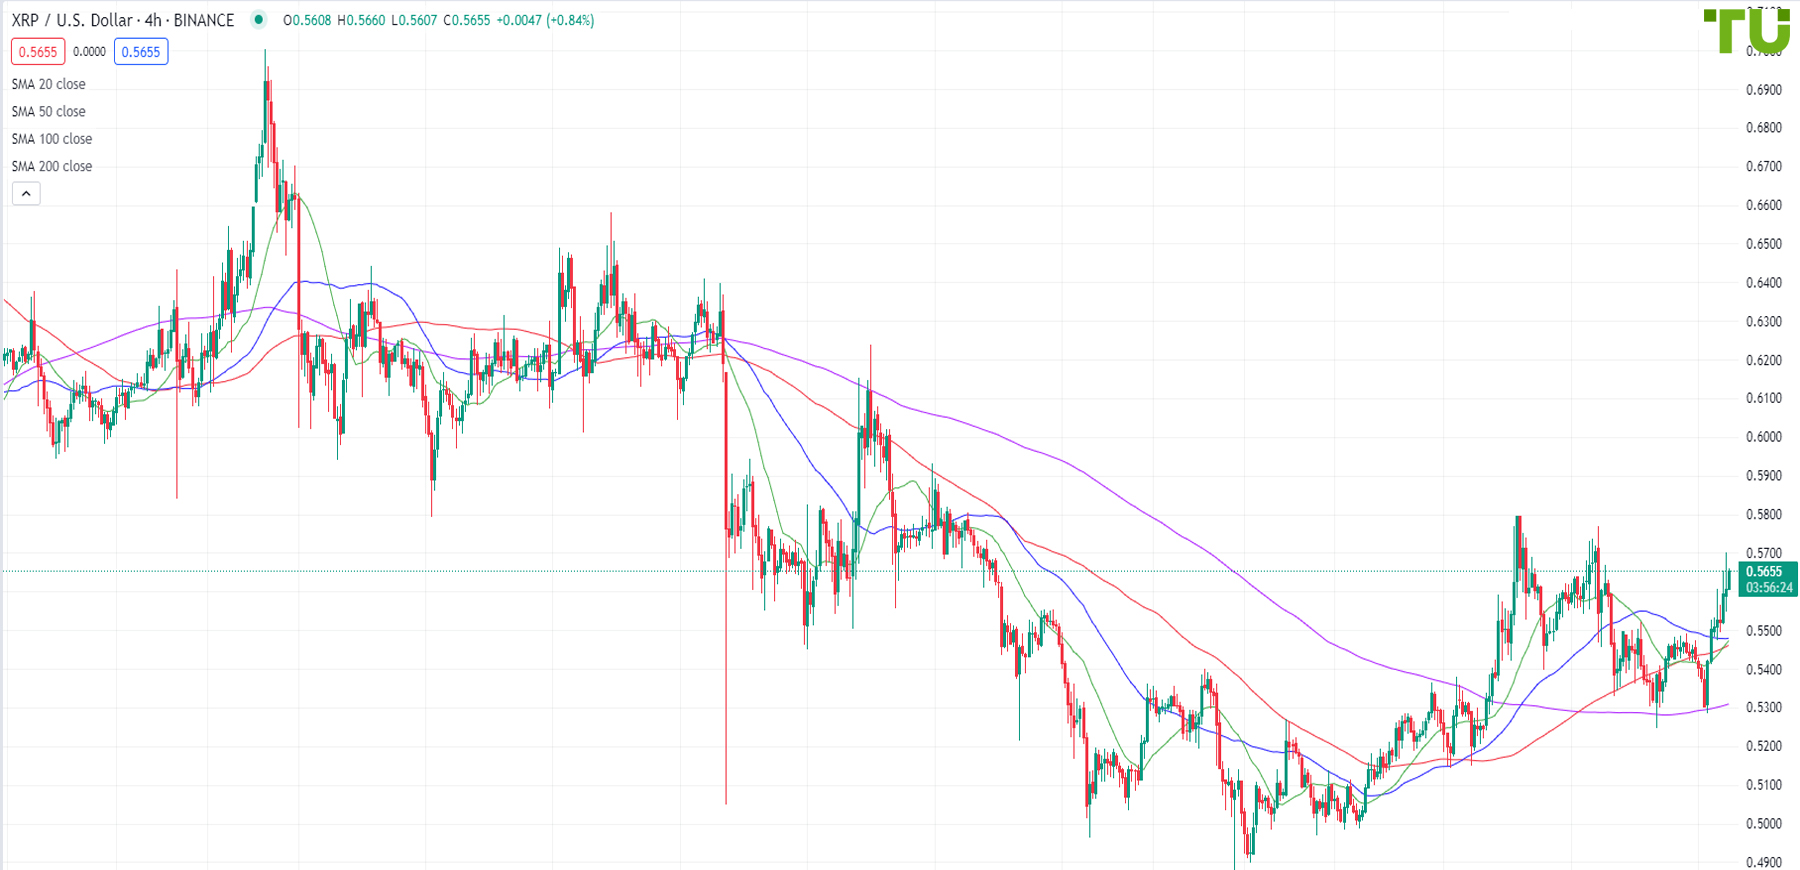 XRP/USD storms resistance at 0.5700